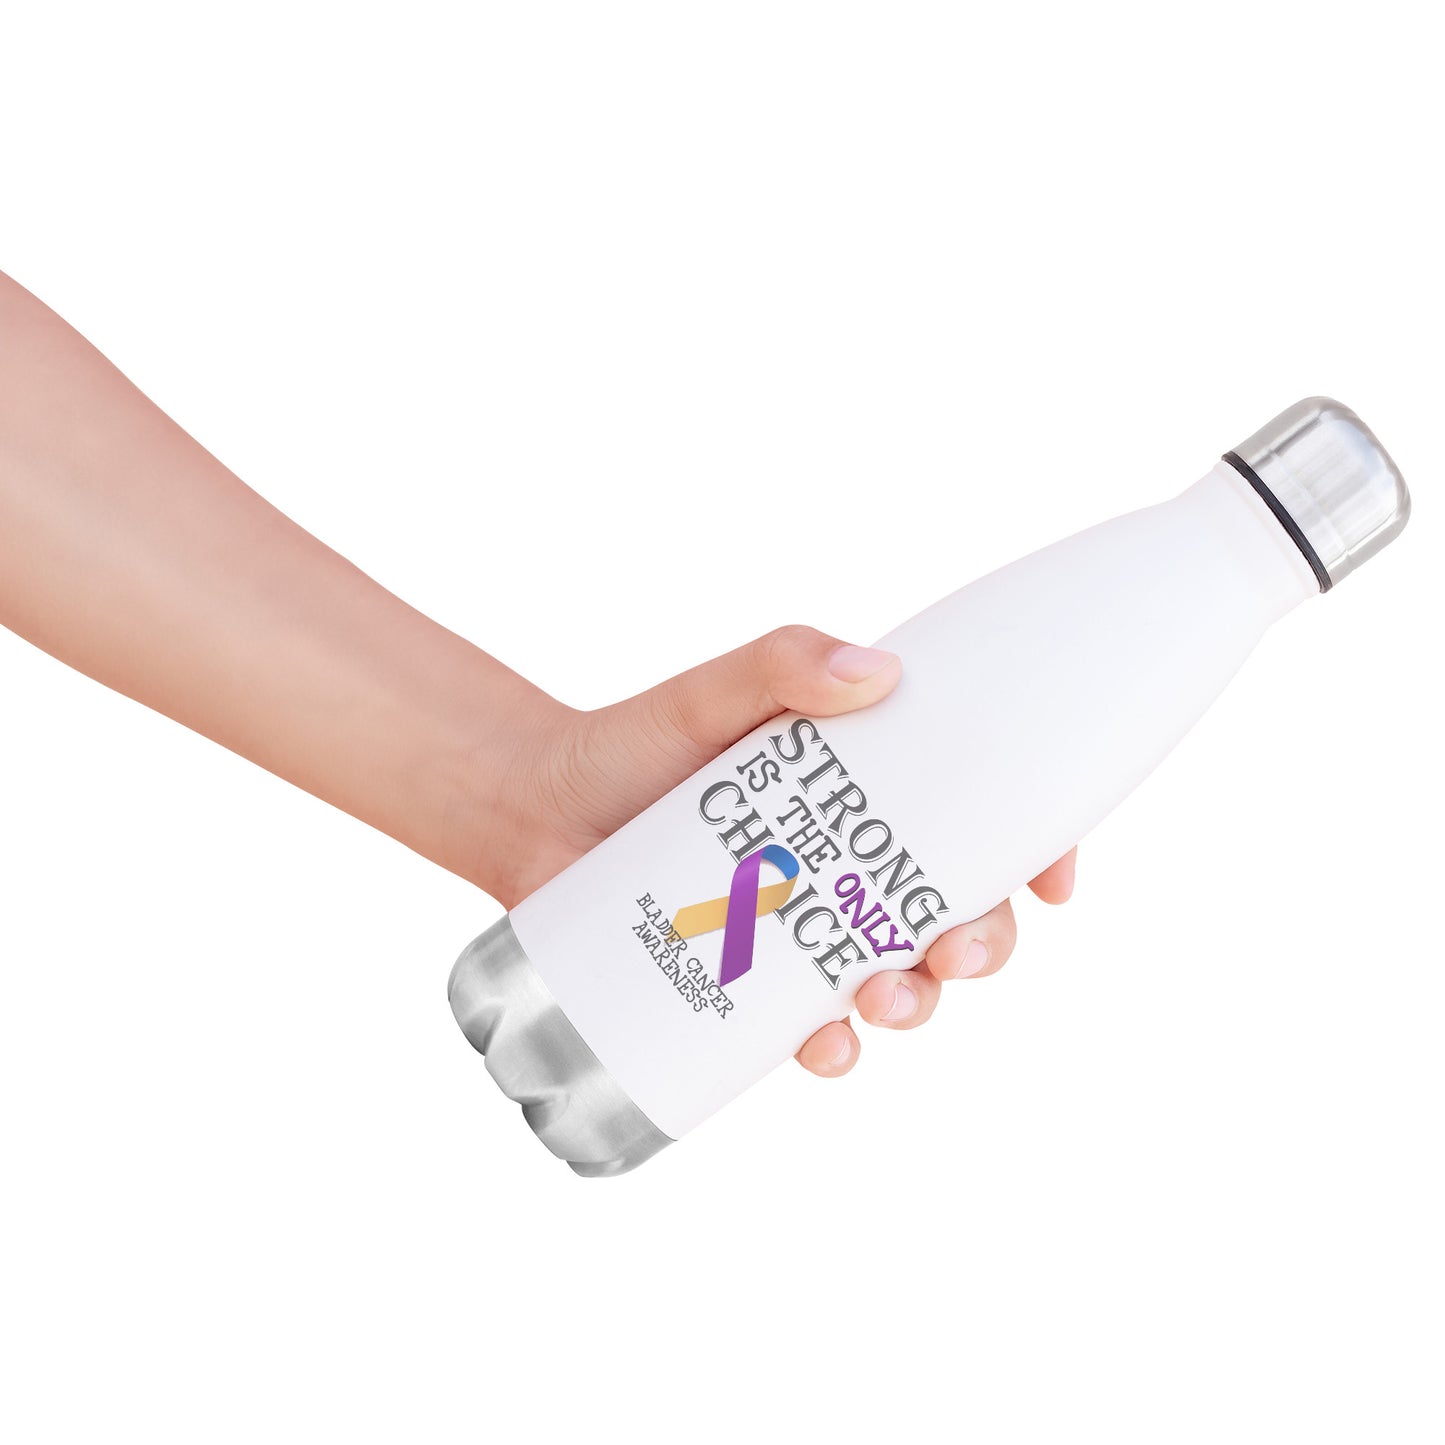 Strong is the Only Choice -Bladder Cancer Awareness 20oz Insulated Water Bottle